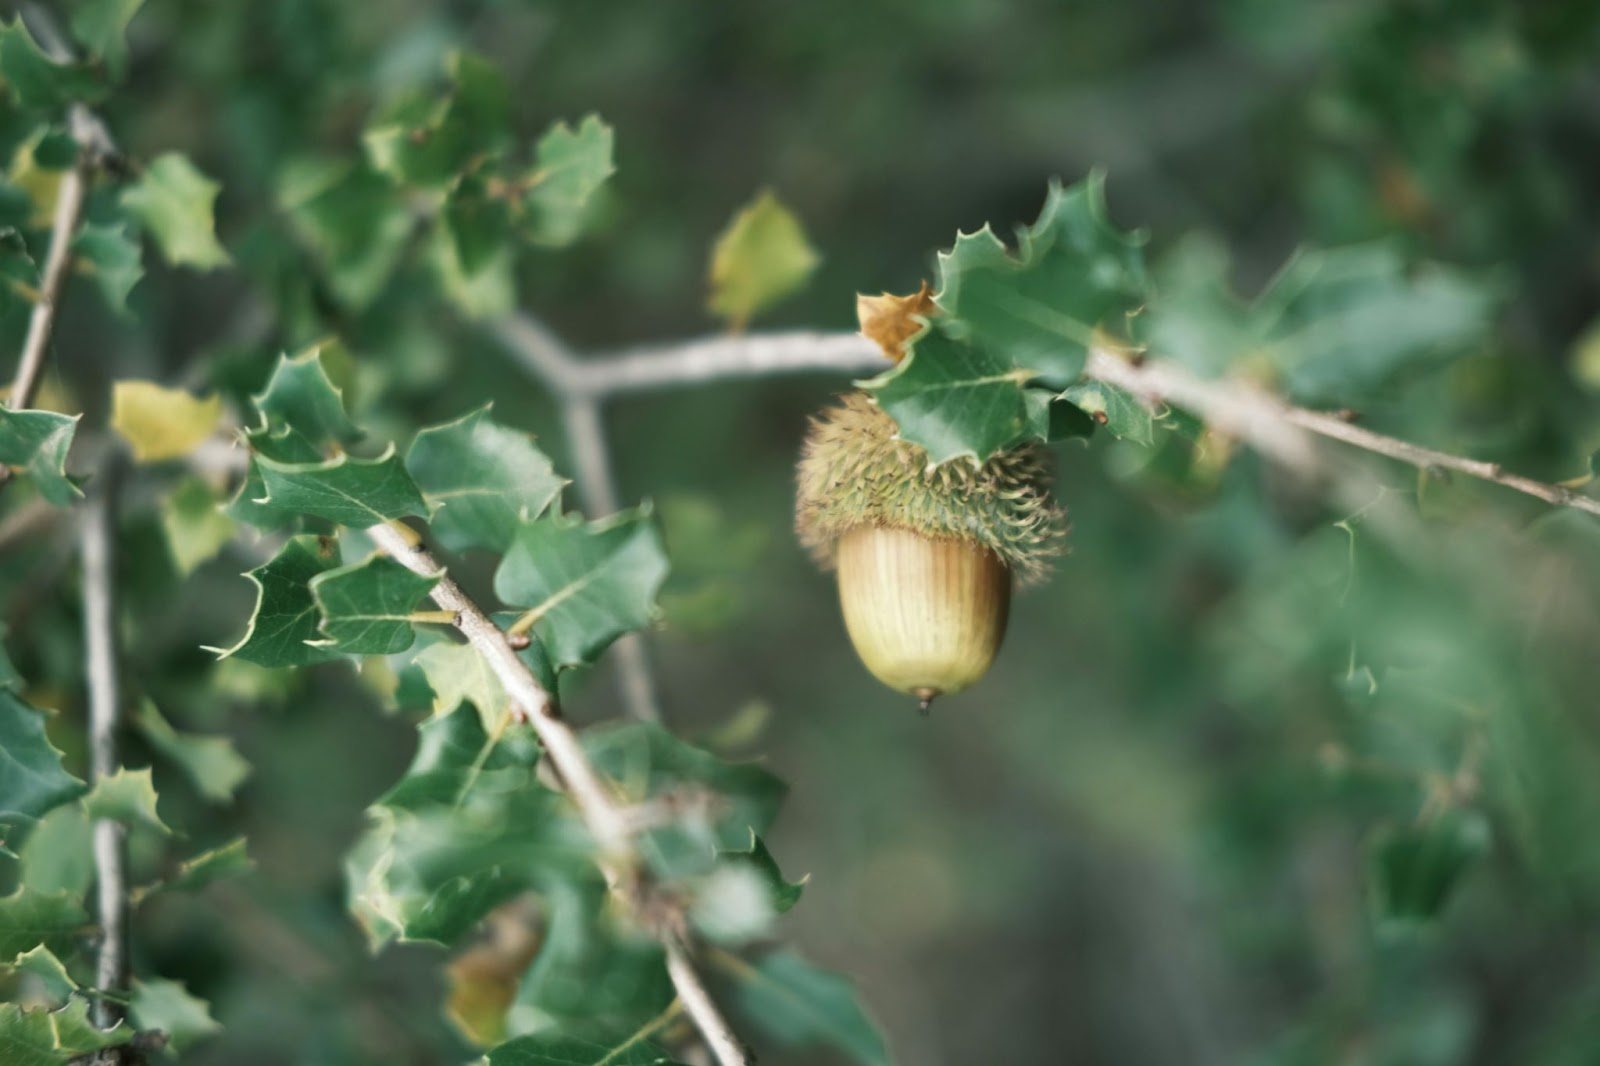 an image of an acorn, a nut source for black bears in the West.